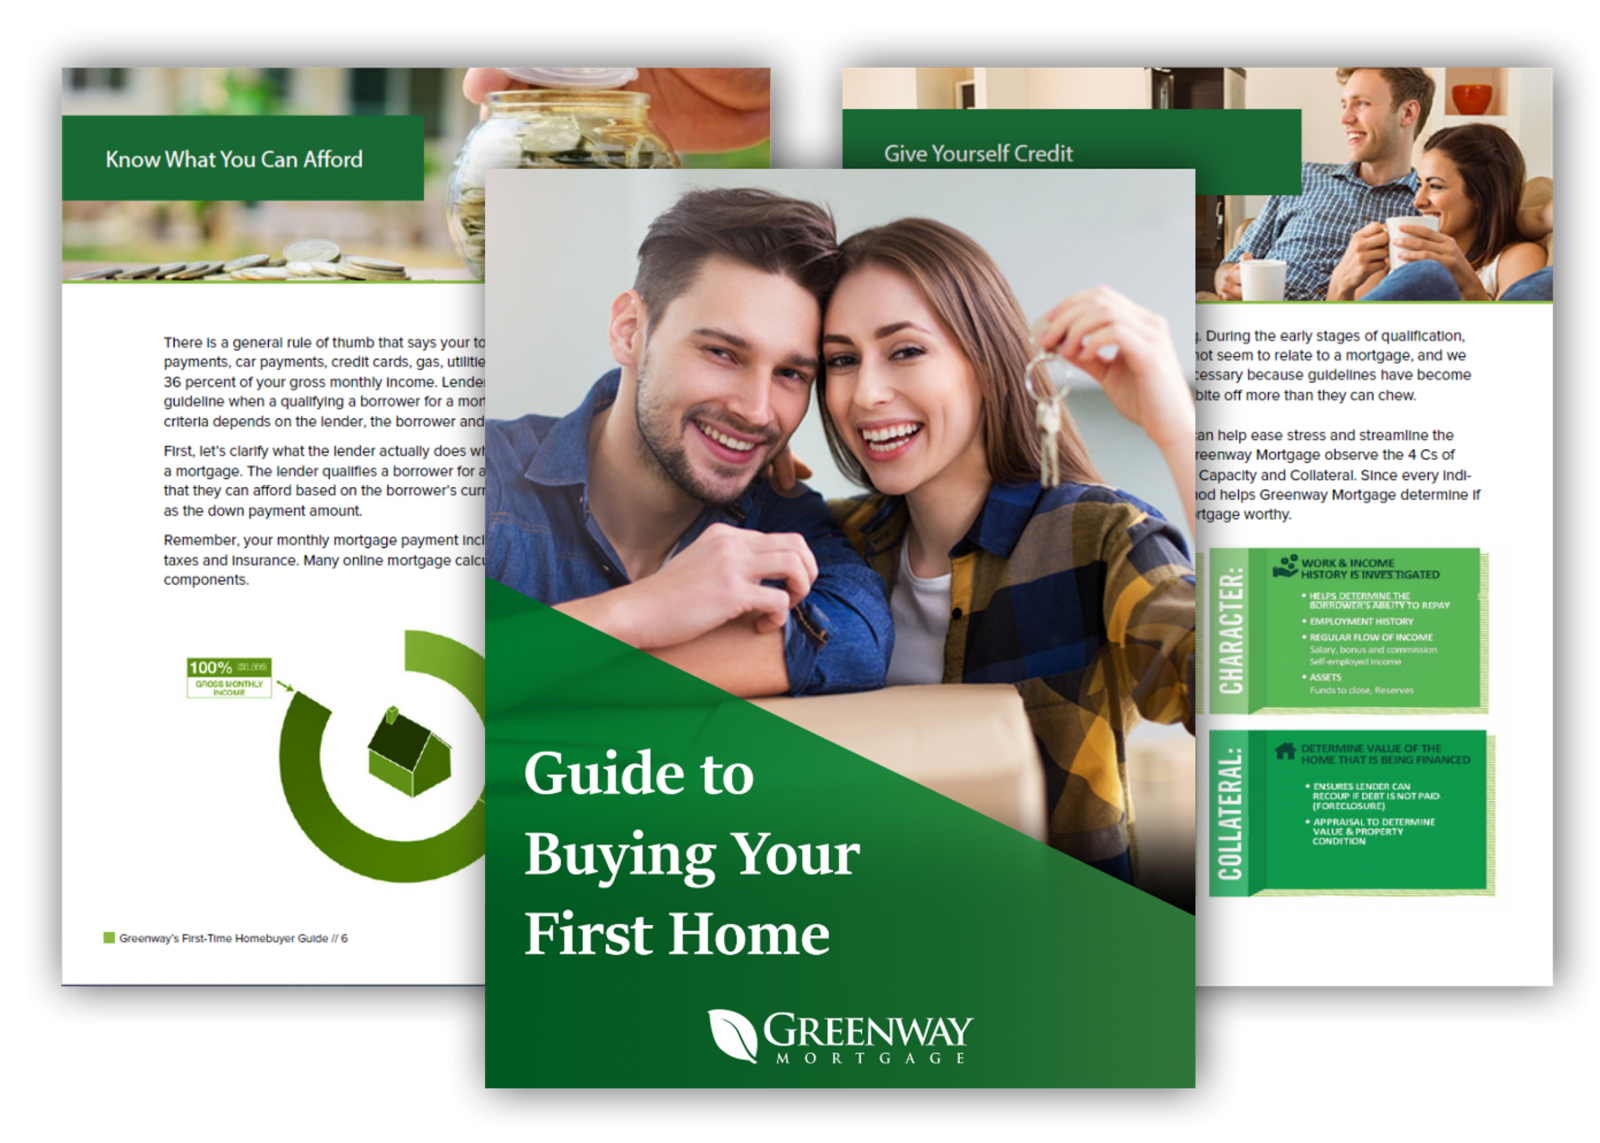 Greenway's Guide to Buying Your First Home